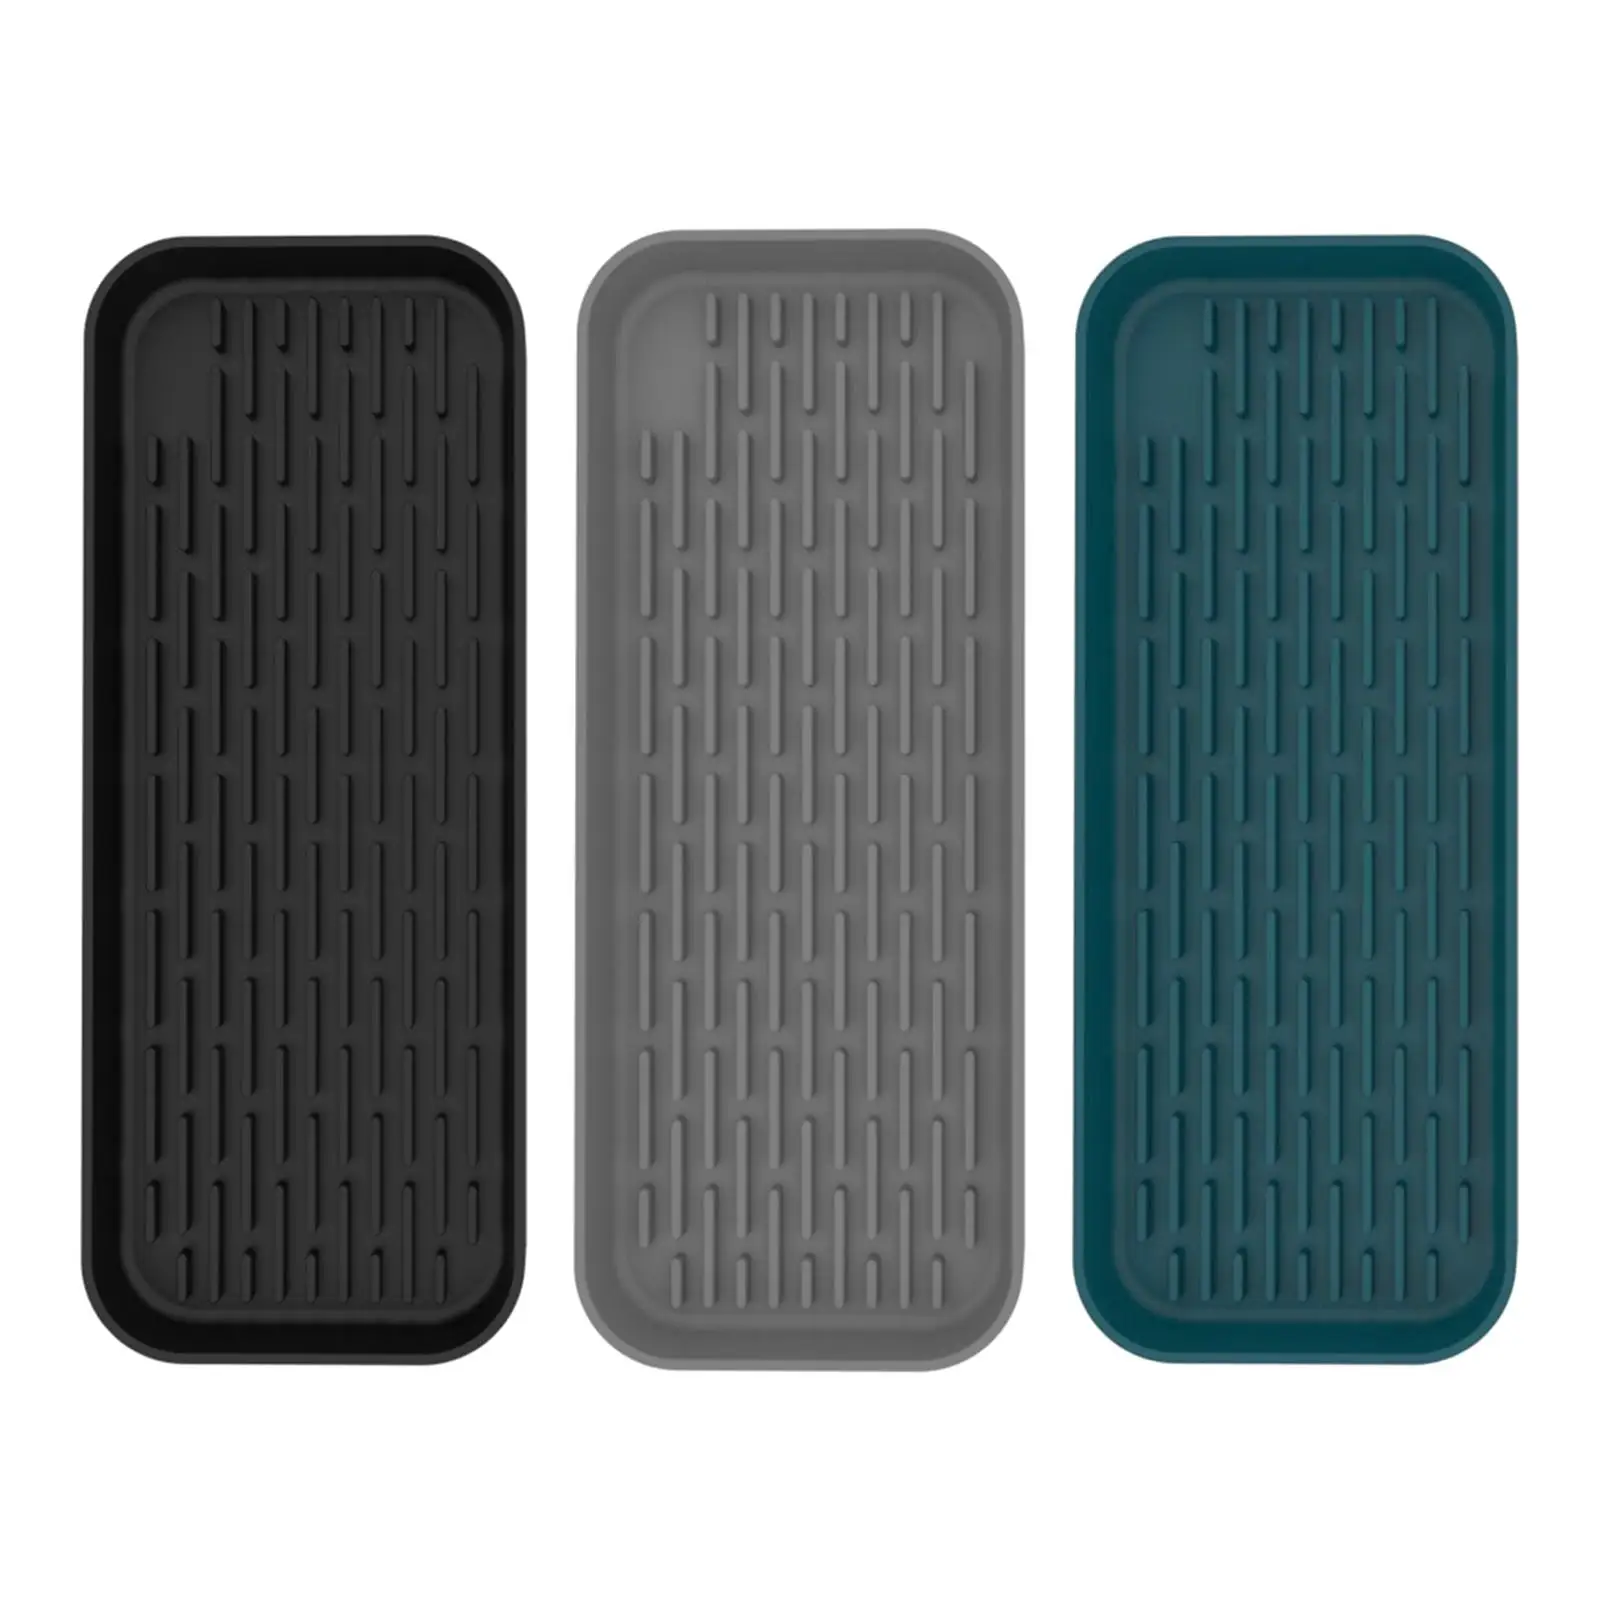 Silicone Tray Kitchen Storage Tray Protector Mats Non Slip Tableware Drip Tray for Home Bathroom Kitchen Hotel Countertop